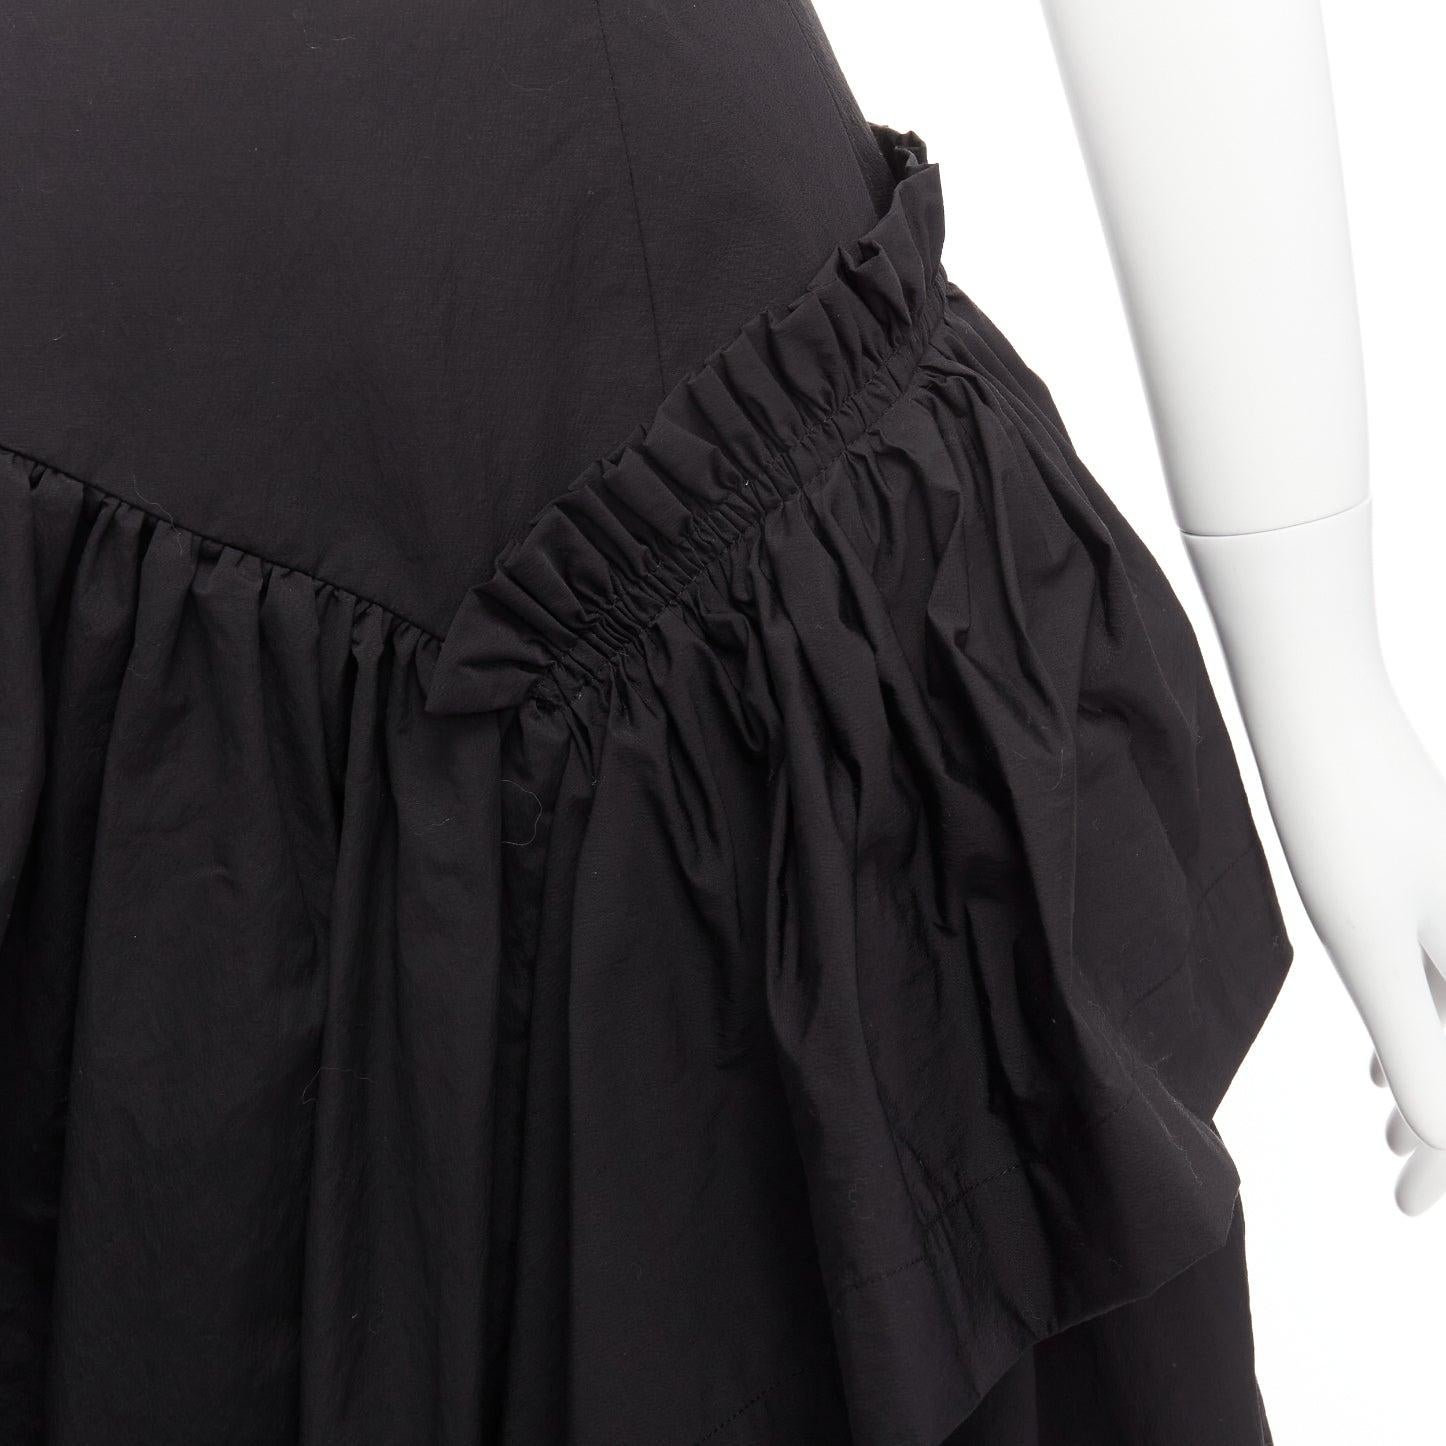 MINJUKIM 2022 black polyester ruffle trim full skirt IT34 XS
Reference: AAWC/A00590
Brand: Minjukim
Collection: 2022
Material: Polyester, Blend
Color: Black
Pattern: Solid
Closure: Zip
Lining: Black Polyester
Extra Details: Dual side pockets. Side